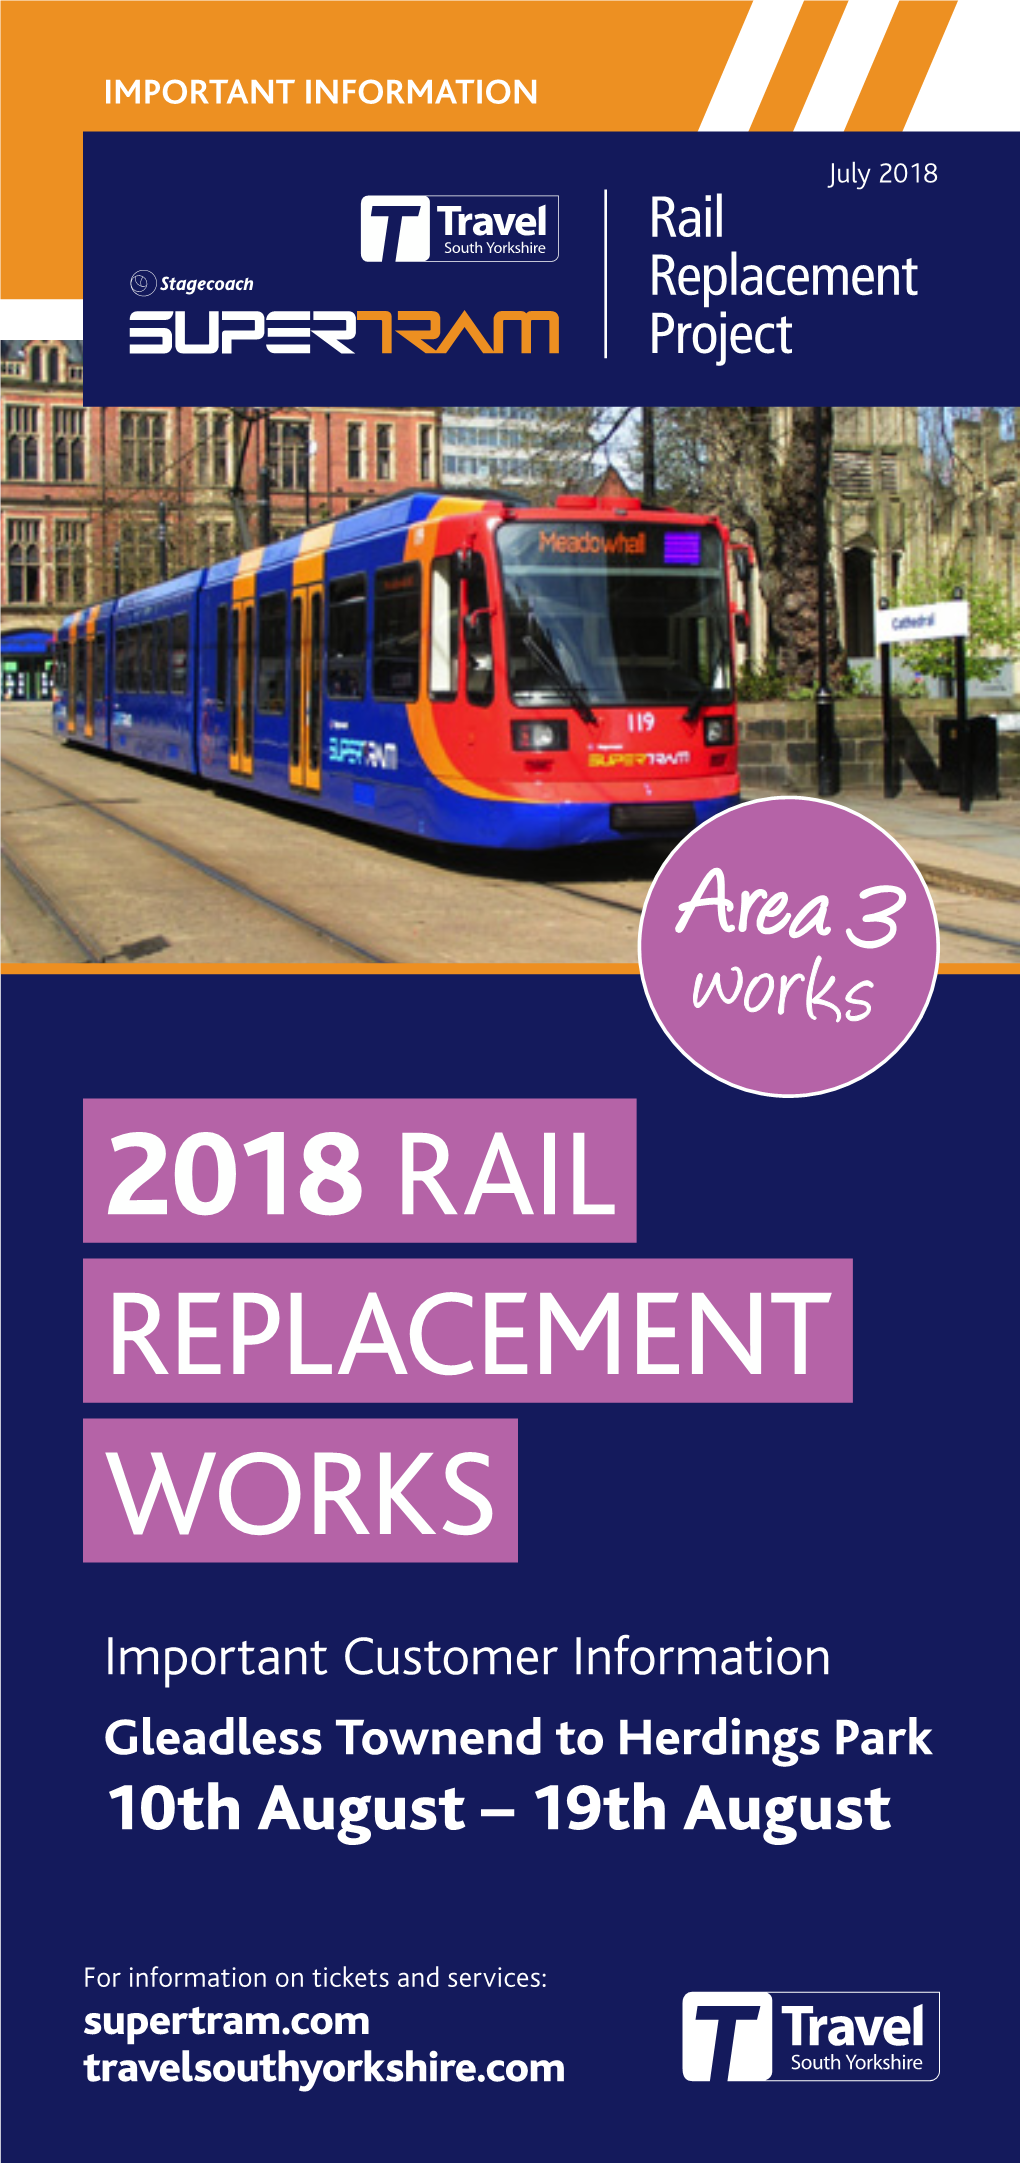 Works Replacement 2018 Rail